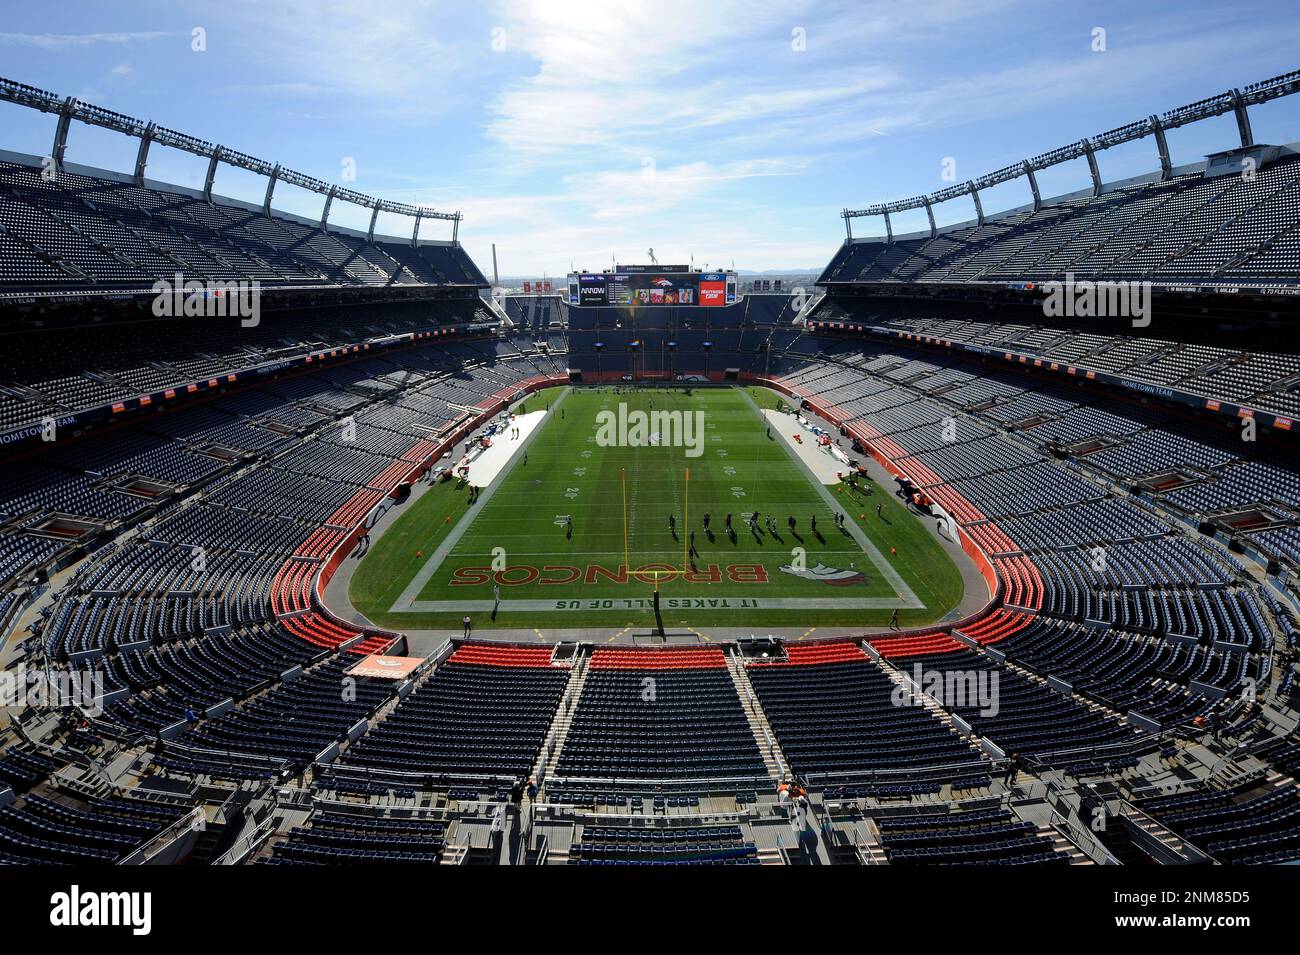 DENVER, CO - NOVEMBER 28: An overview of the stadium as players warm up for  the NFL game between the Los Angeles Chargers and the Denver Broncos on  November 28, 2021, at